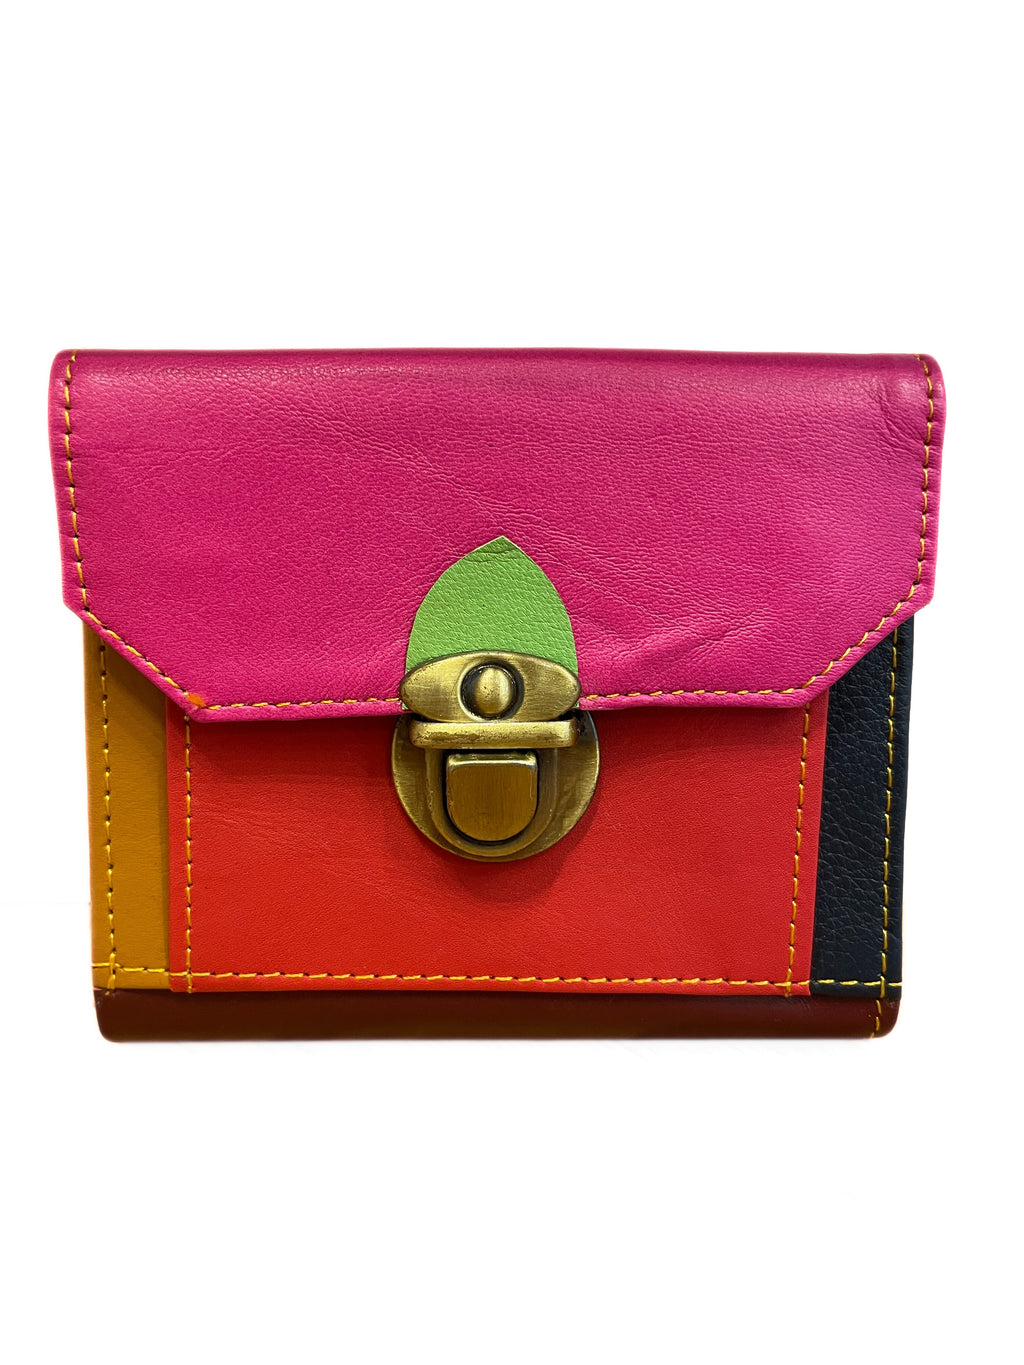 The Isabelle Red Leather Cross Body Bag - Artichoke - FREE DELIVERY UK